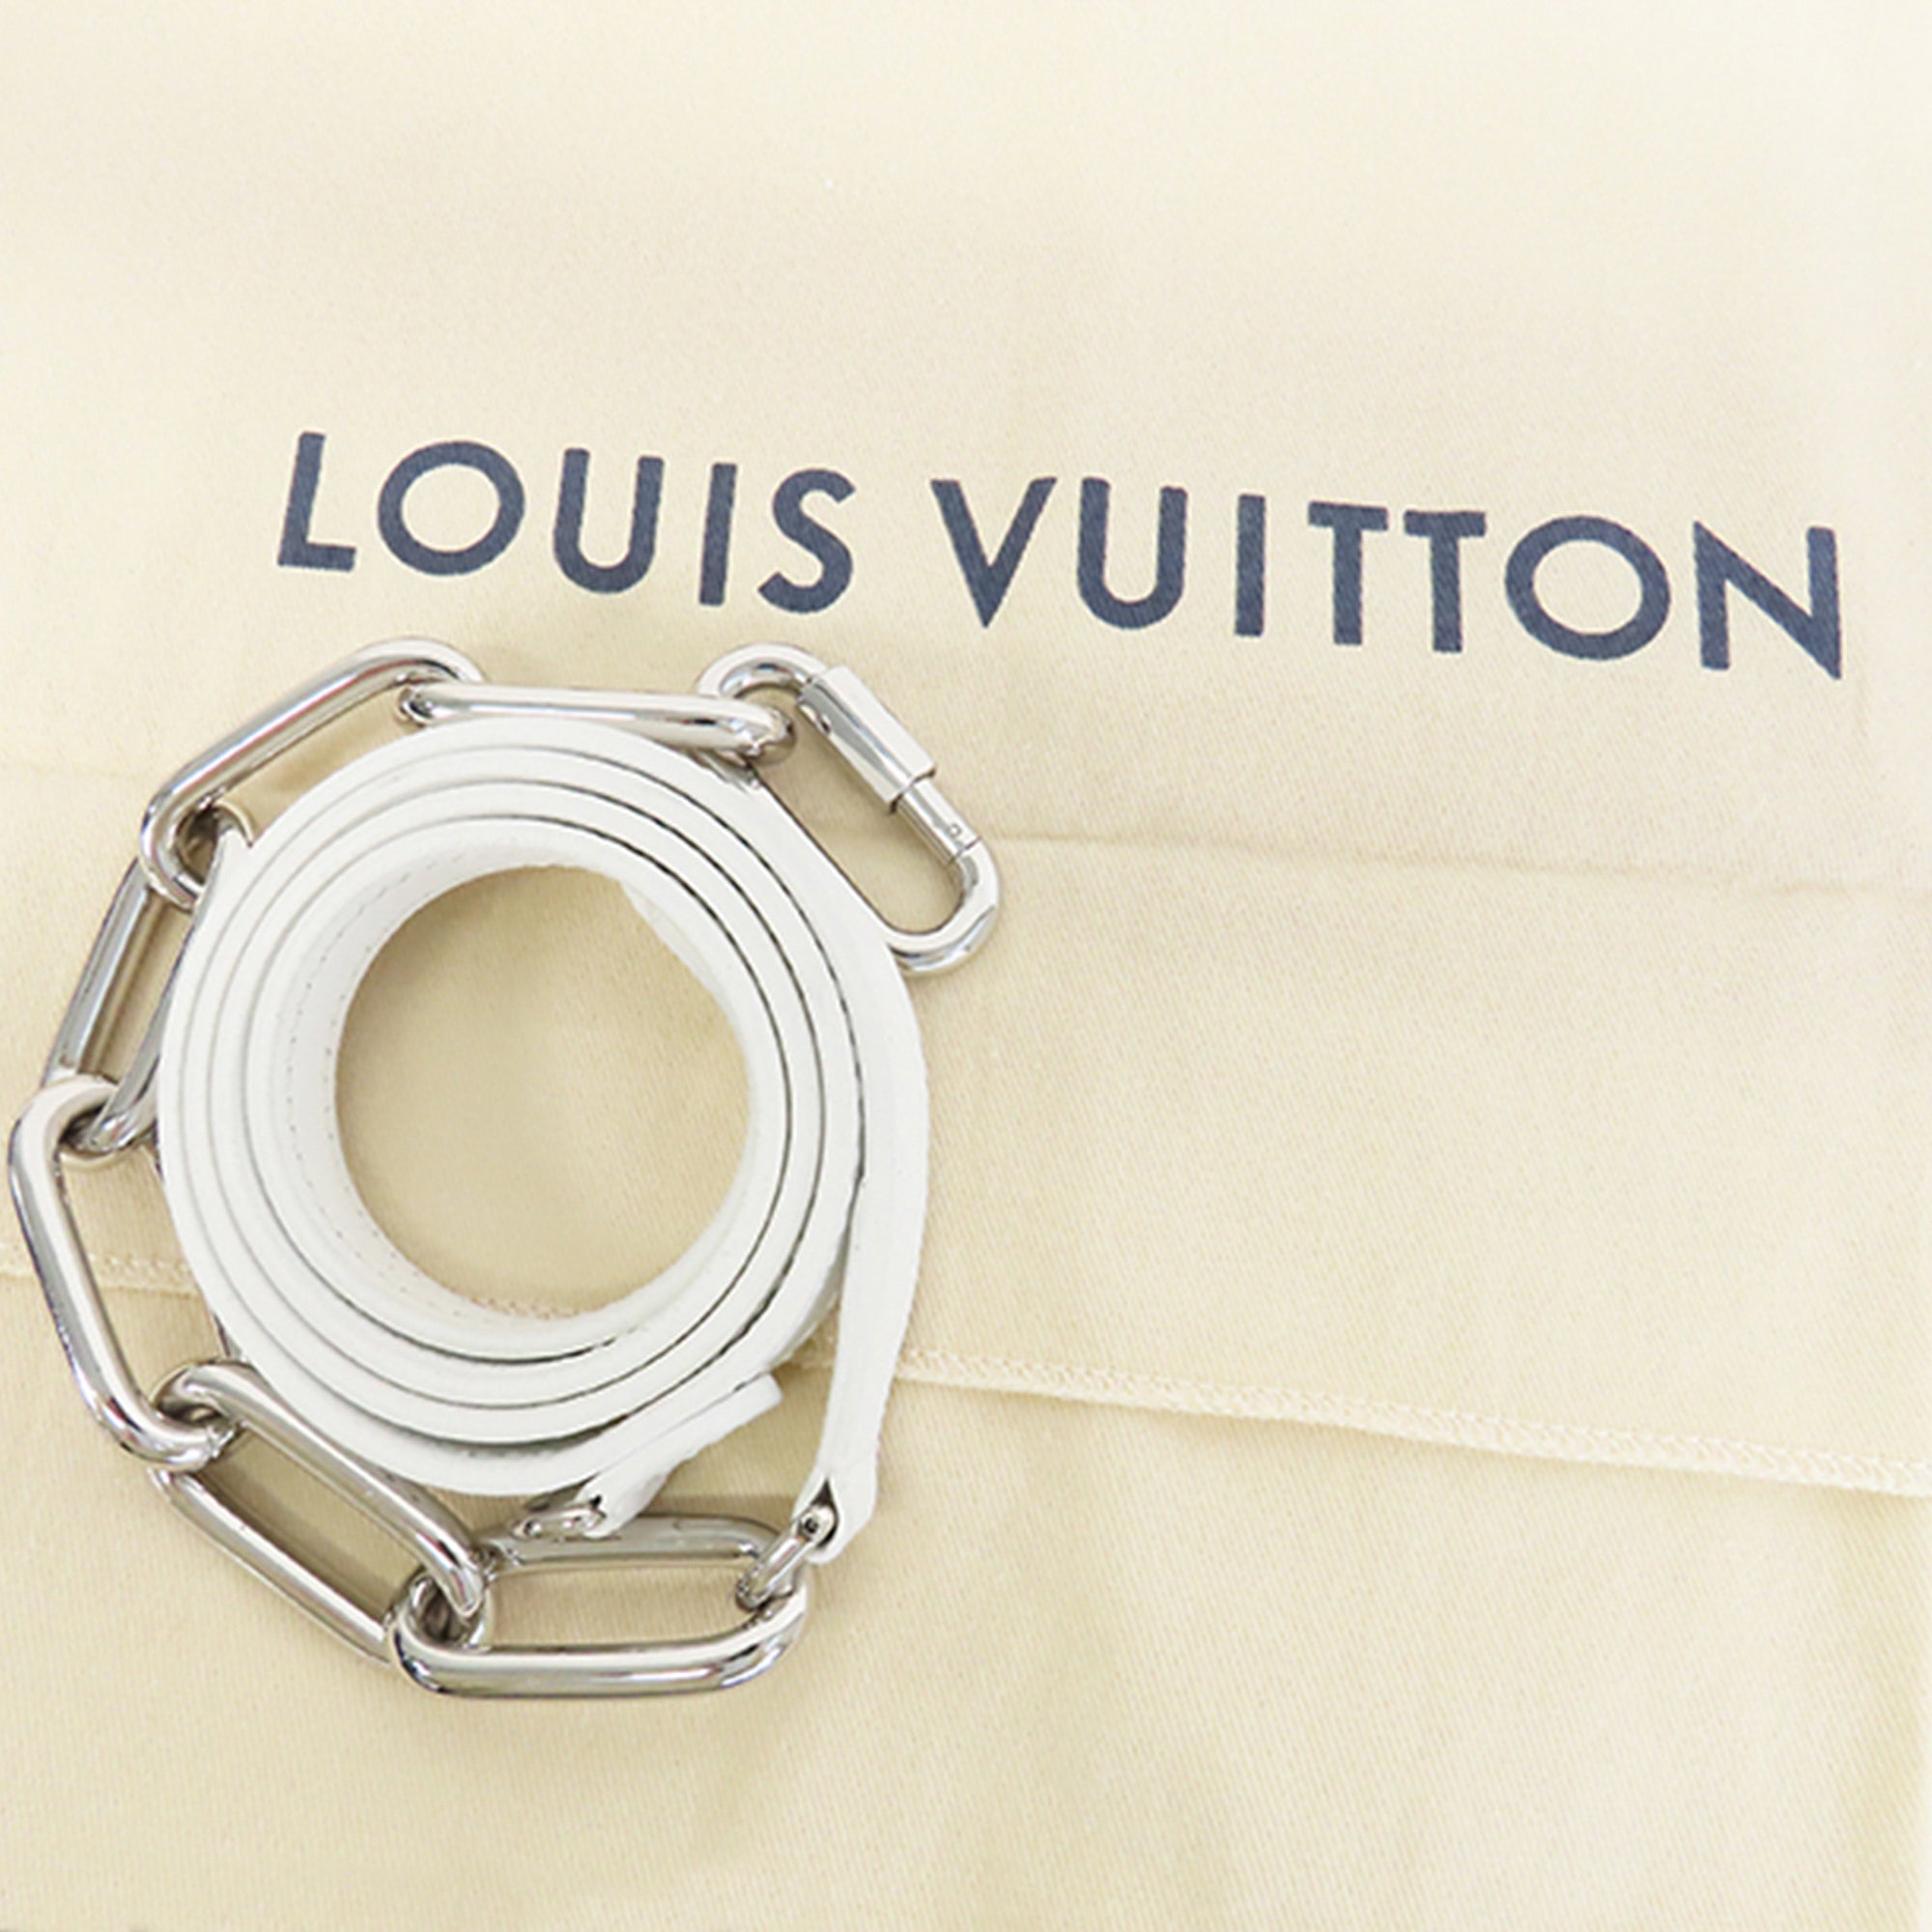 Louis Vuitton Sac Plat XS Bag In Blue And White Leather - Praise To Heaven